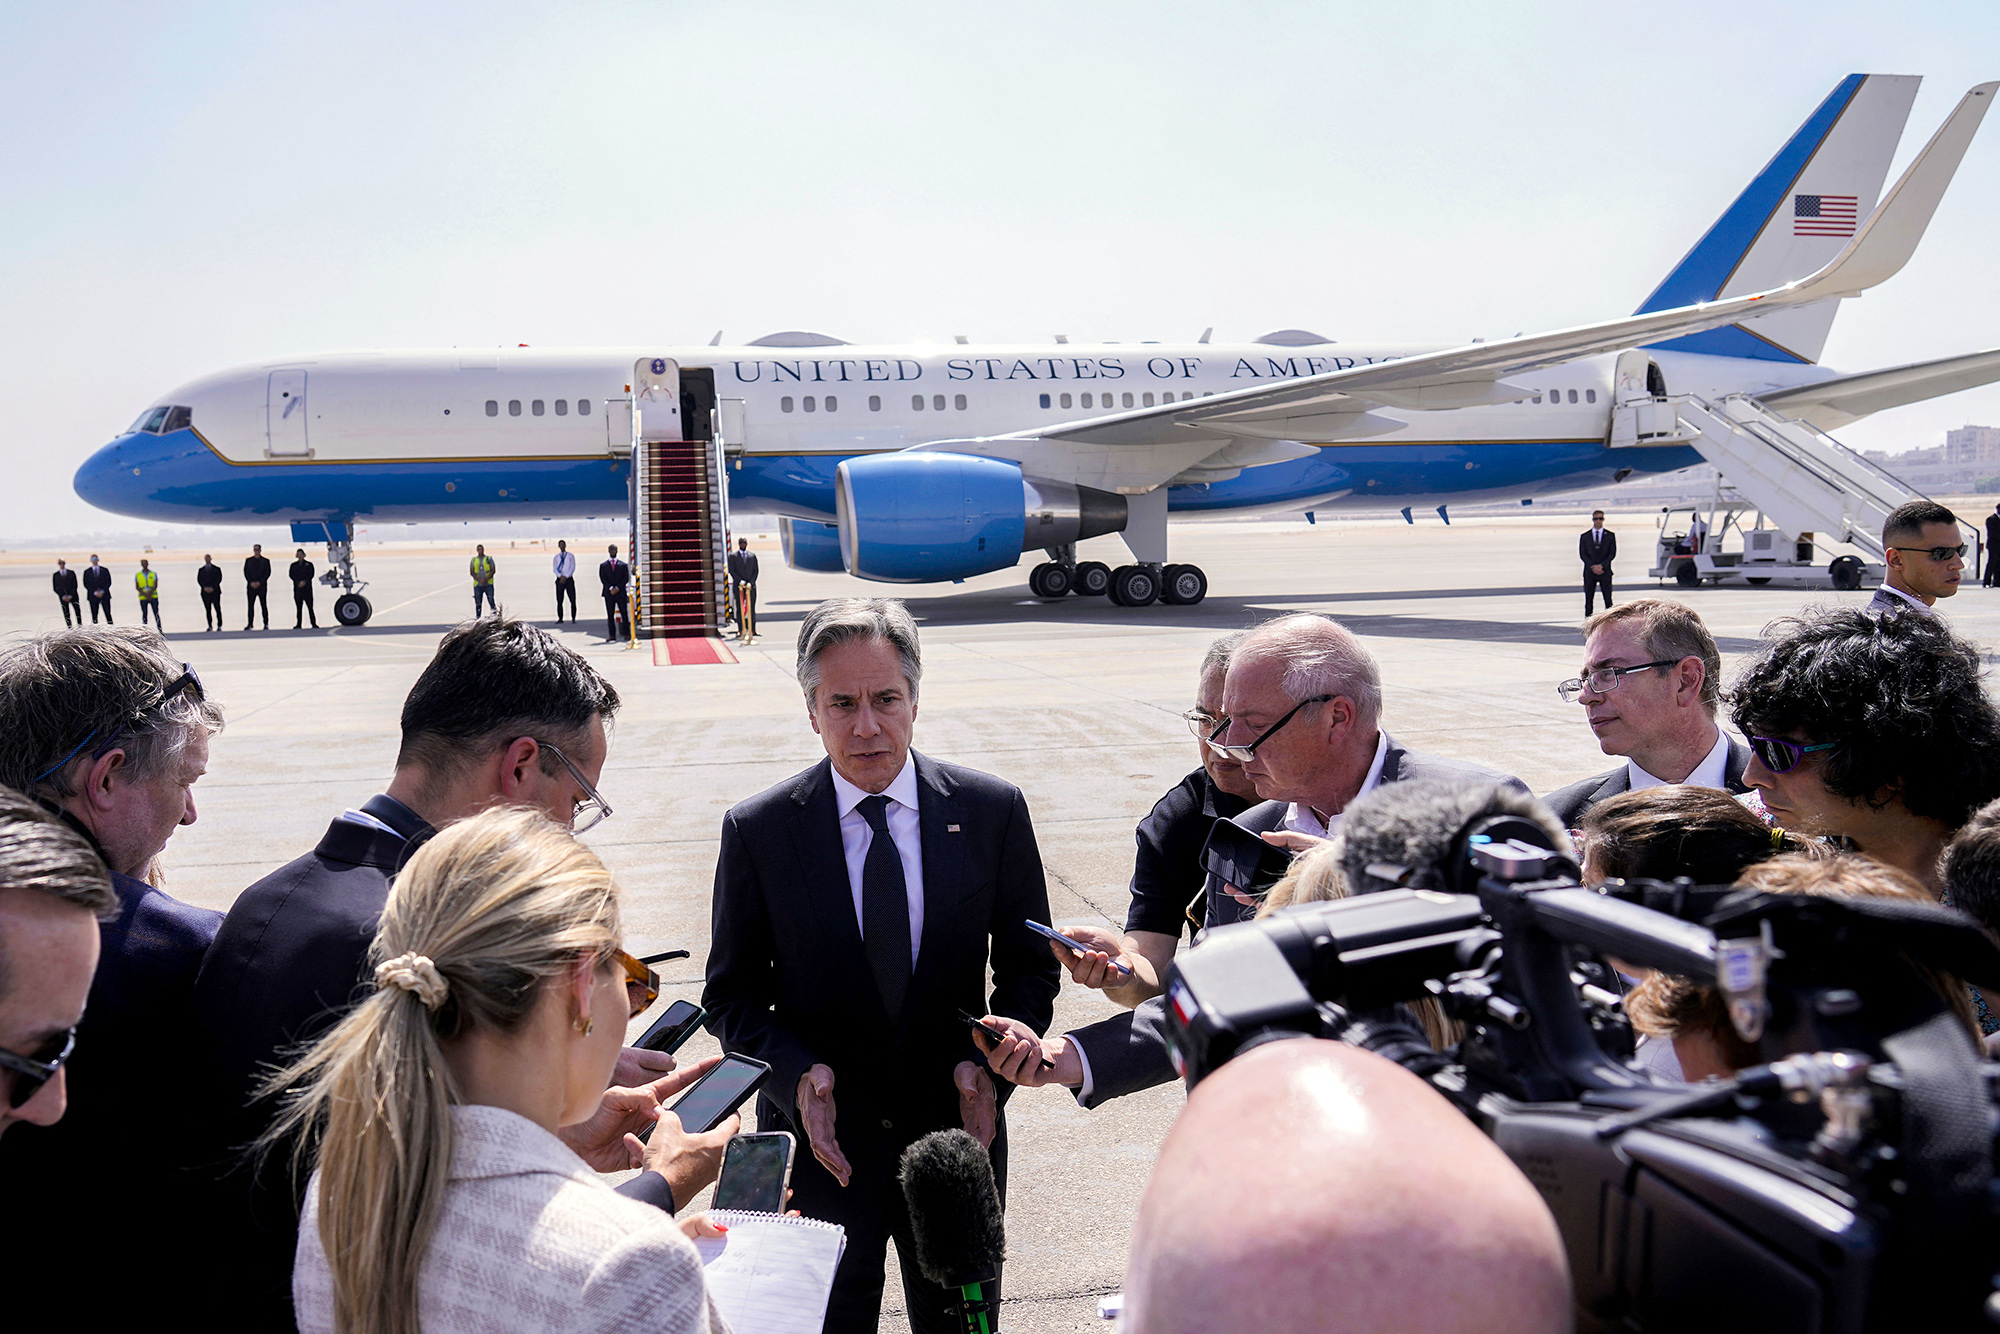 US Secretary of State Antony Blinken, center, speaks to reporters after his meeting with the Egyptian president, at Cairo airport, Egypt, on June 10.